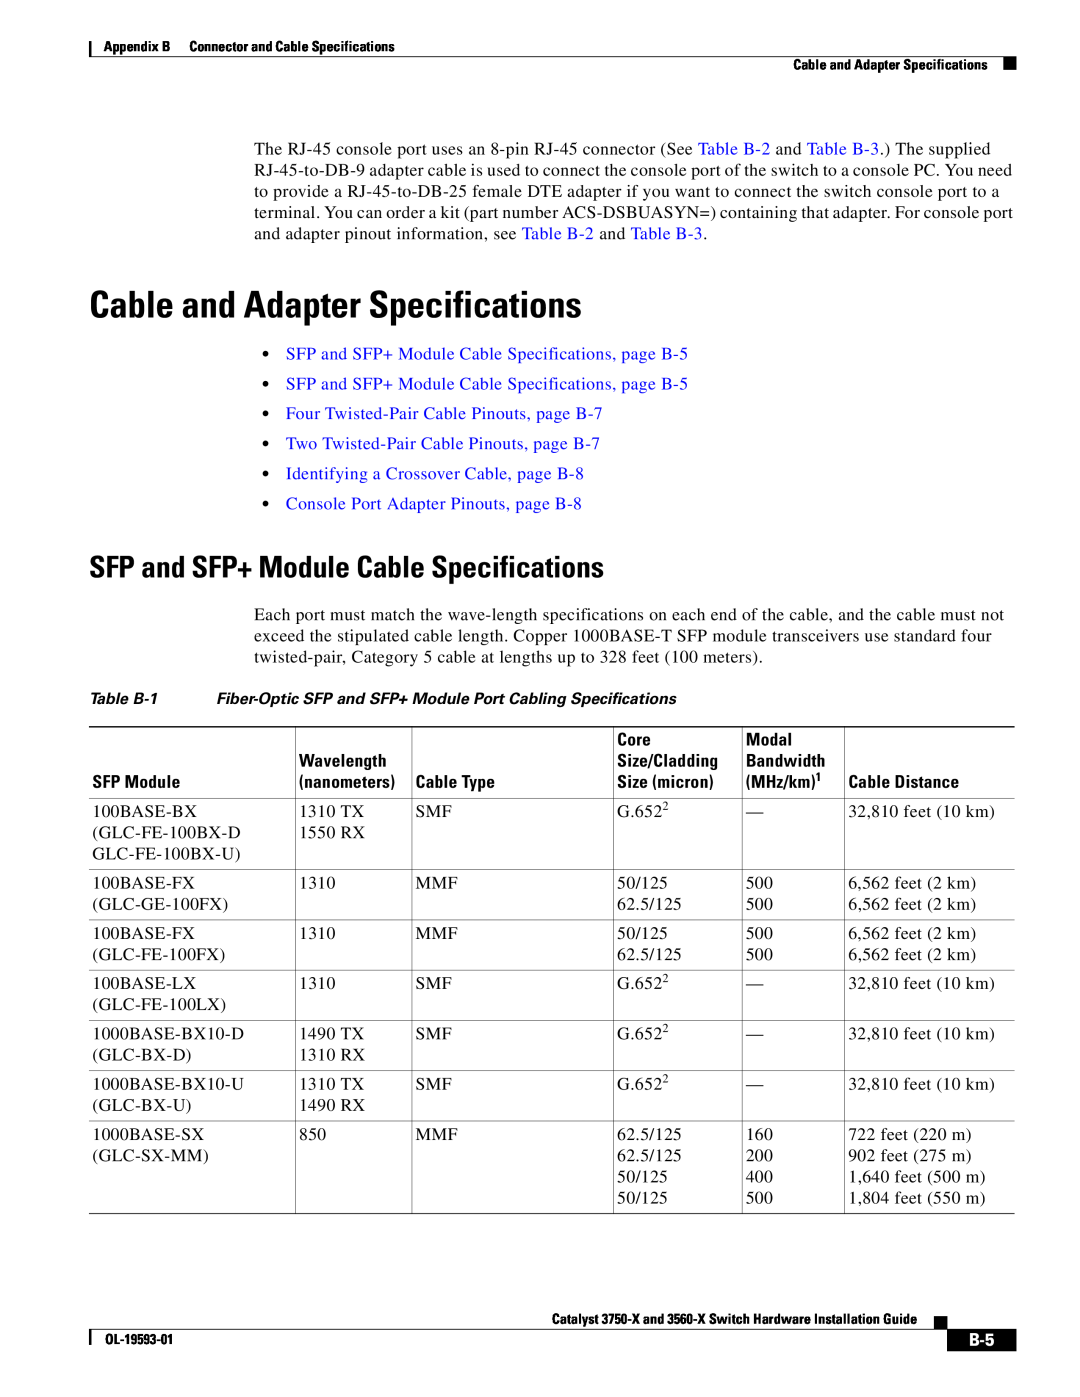 Cisco Systems 3560-X, 3750-X manual Cable and Adapter Specifications, SFP and SFP+ Module Cable Specifications 